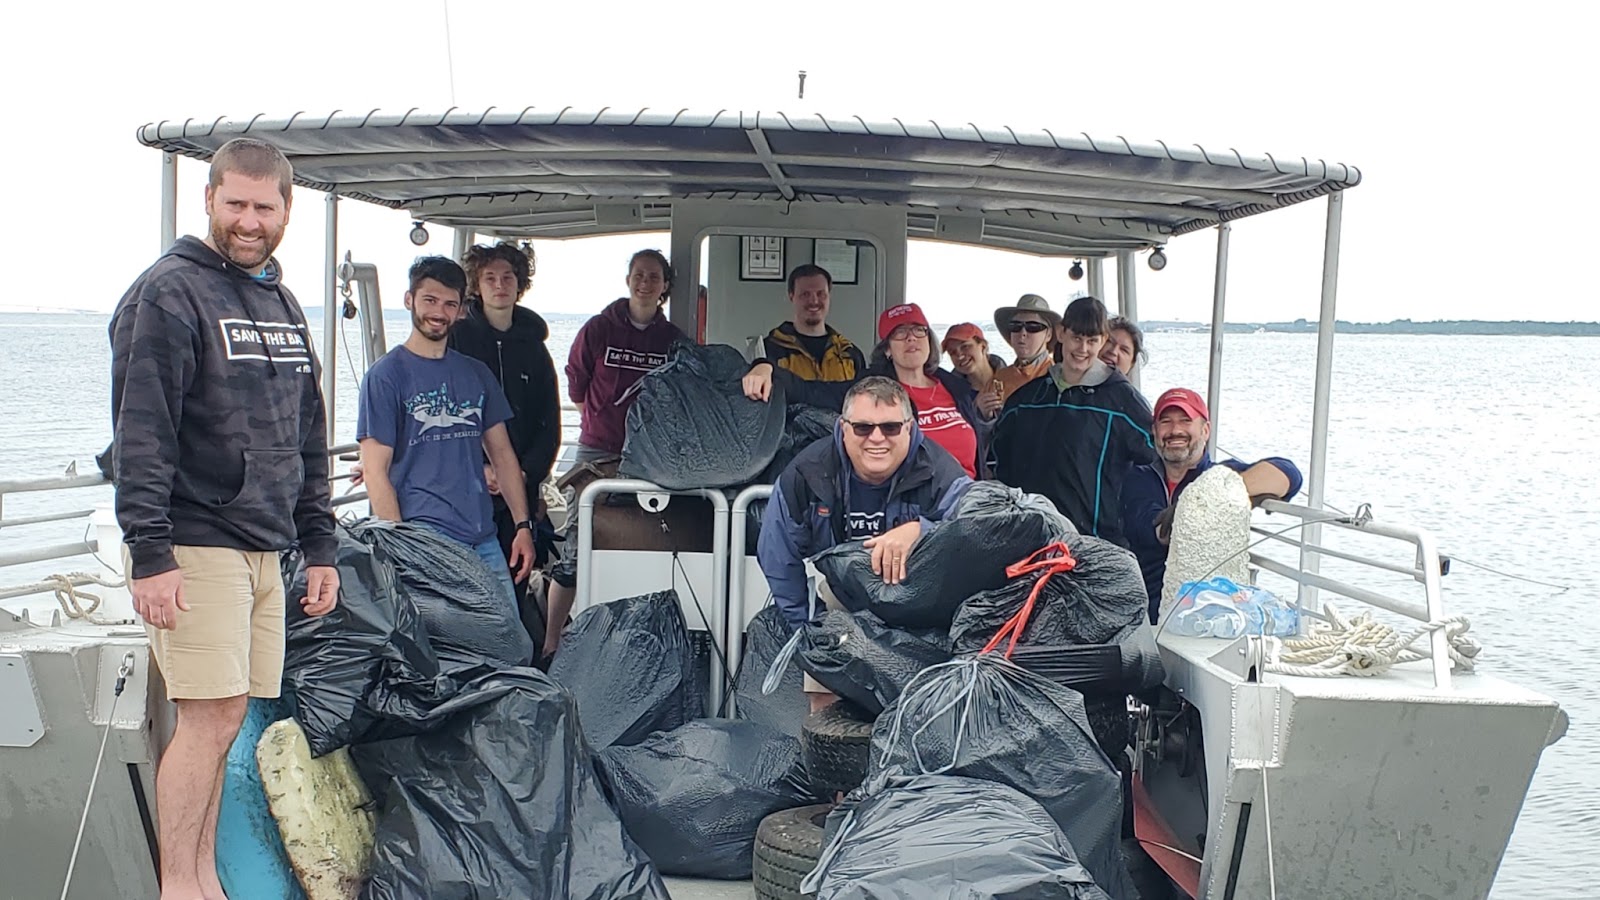 trash on the boat, surrounded by volunteers